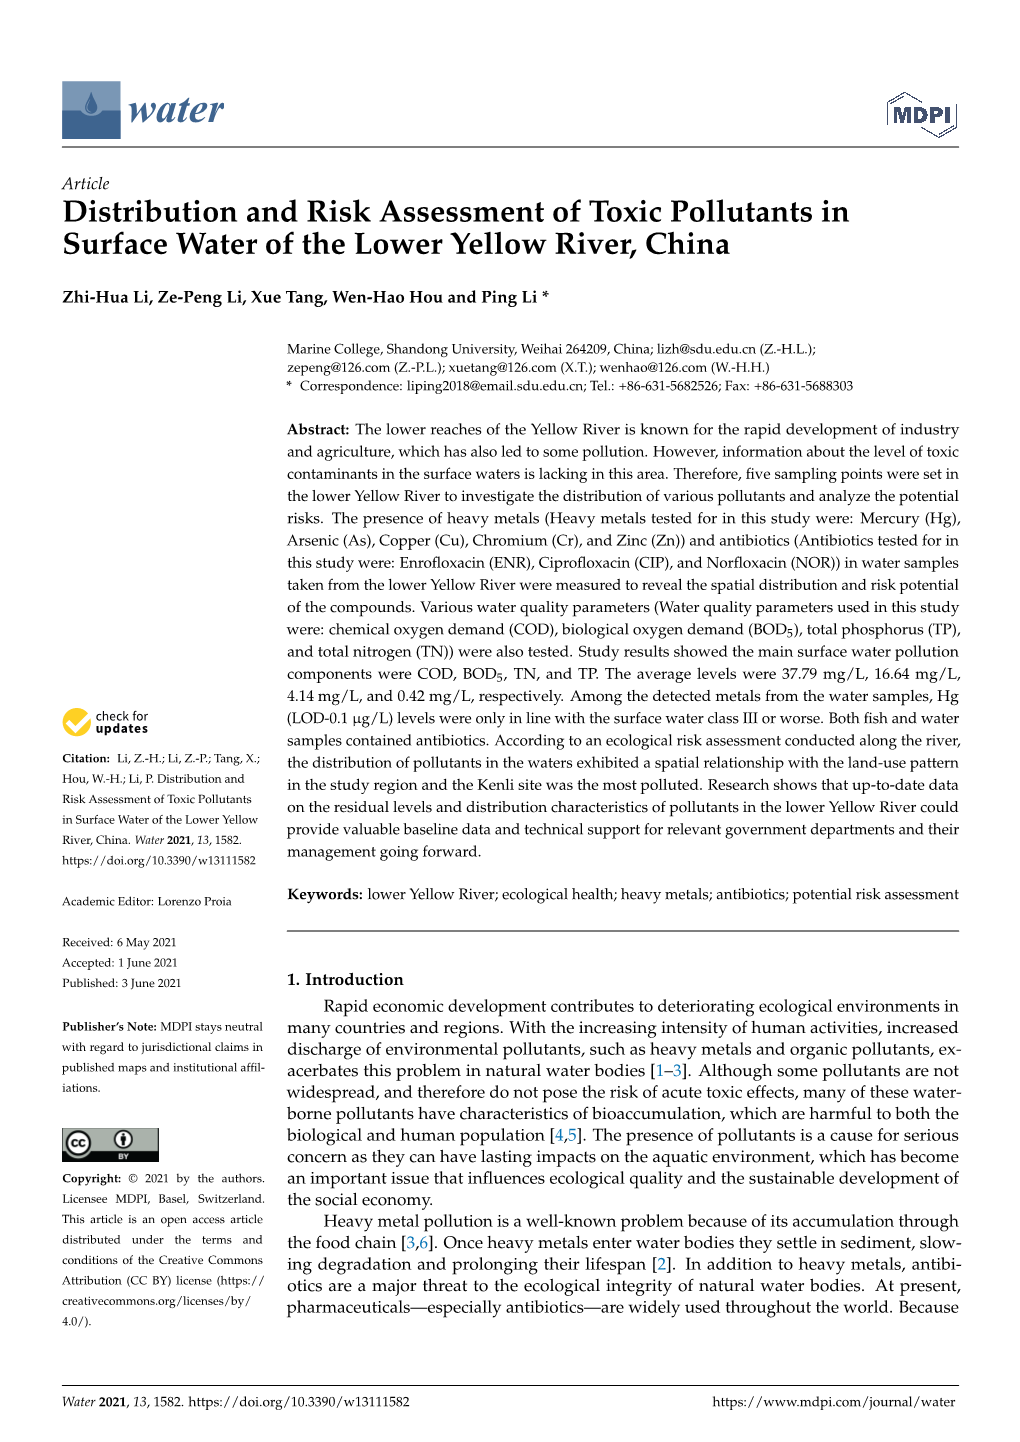 Distribution and Risk Assessment of Toxic Pollutants in Surface Water of the Lower Yellow River, China